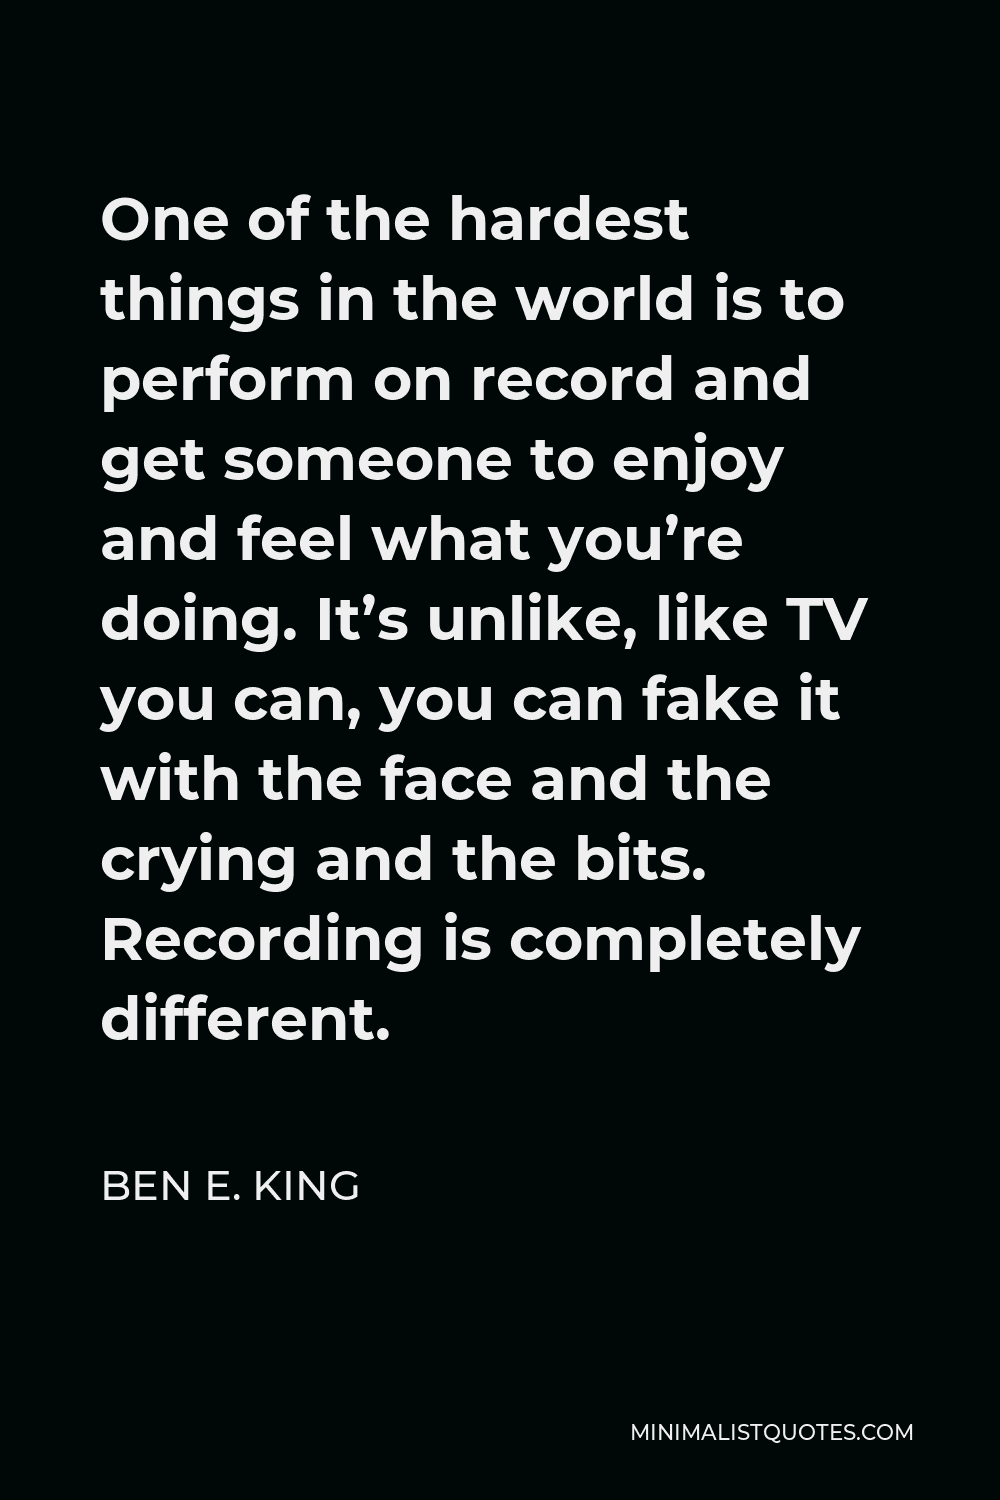 Ben E. King Quote - One of the hardest things in the world is to perform on record and get someone to enjoy and feel what you’re doing. It’s unlike, like TV you can, you can fake it with the face and the crying and the bits. Recording is completely different.